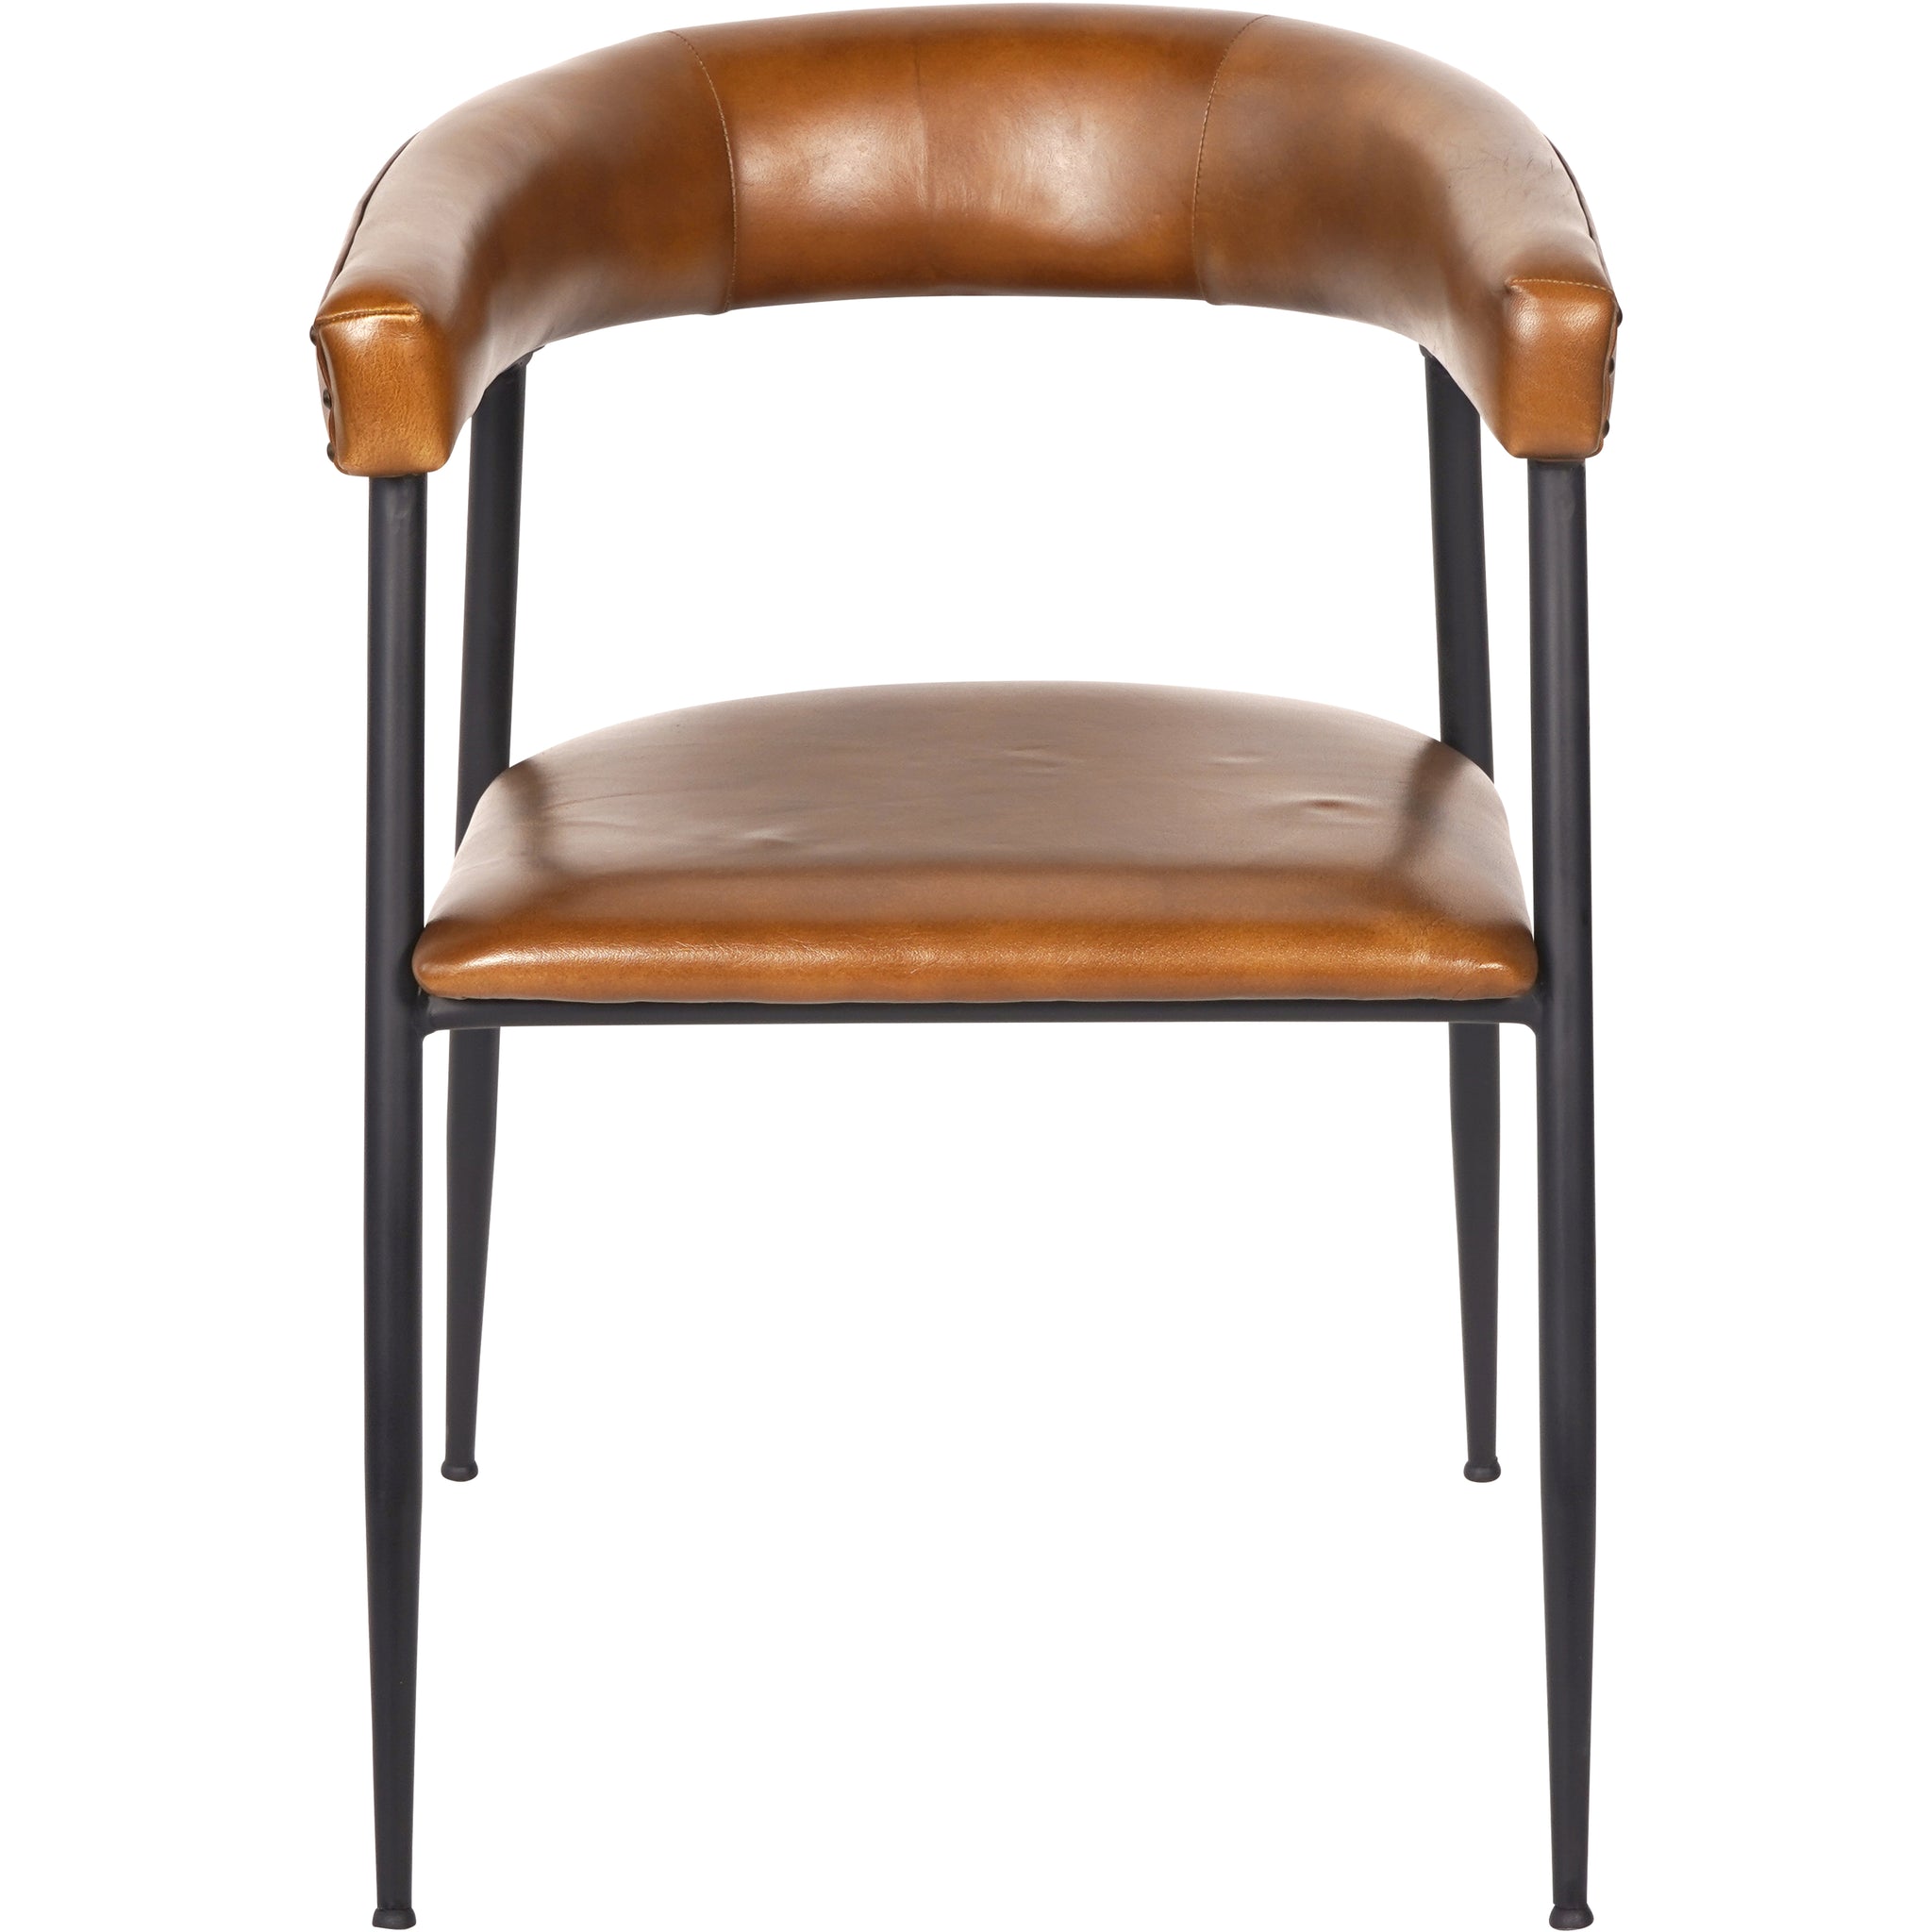 Set of 2 Cameron Leather Dining Chairs in Cognac